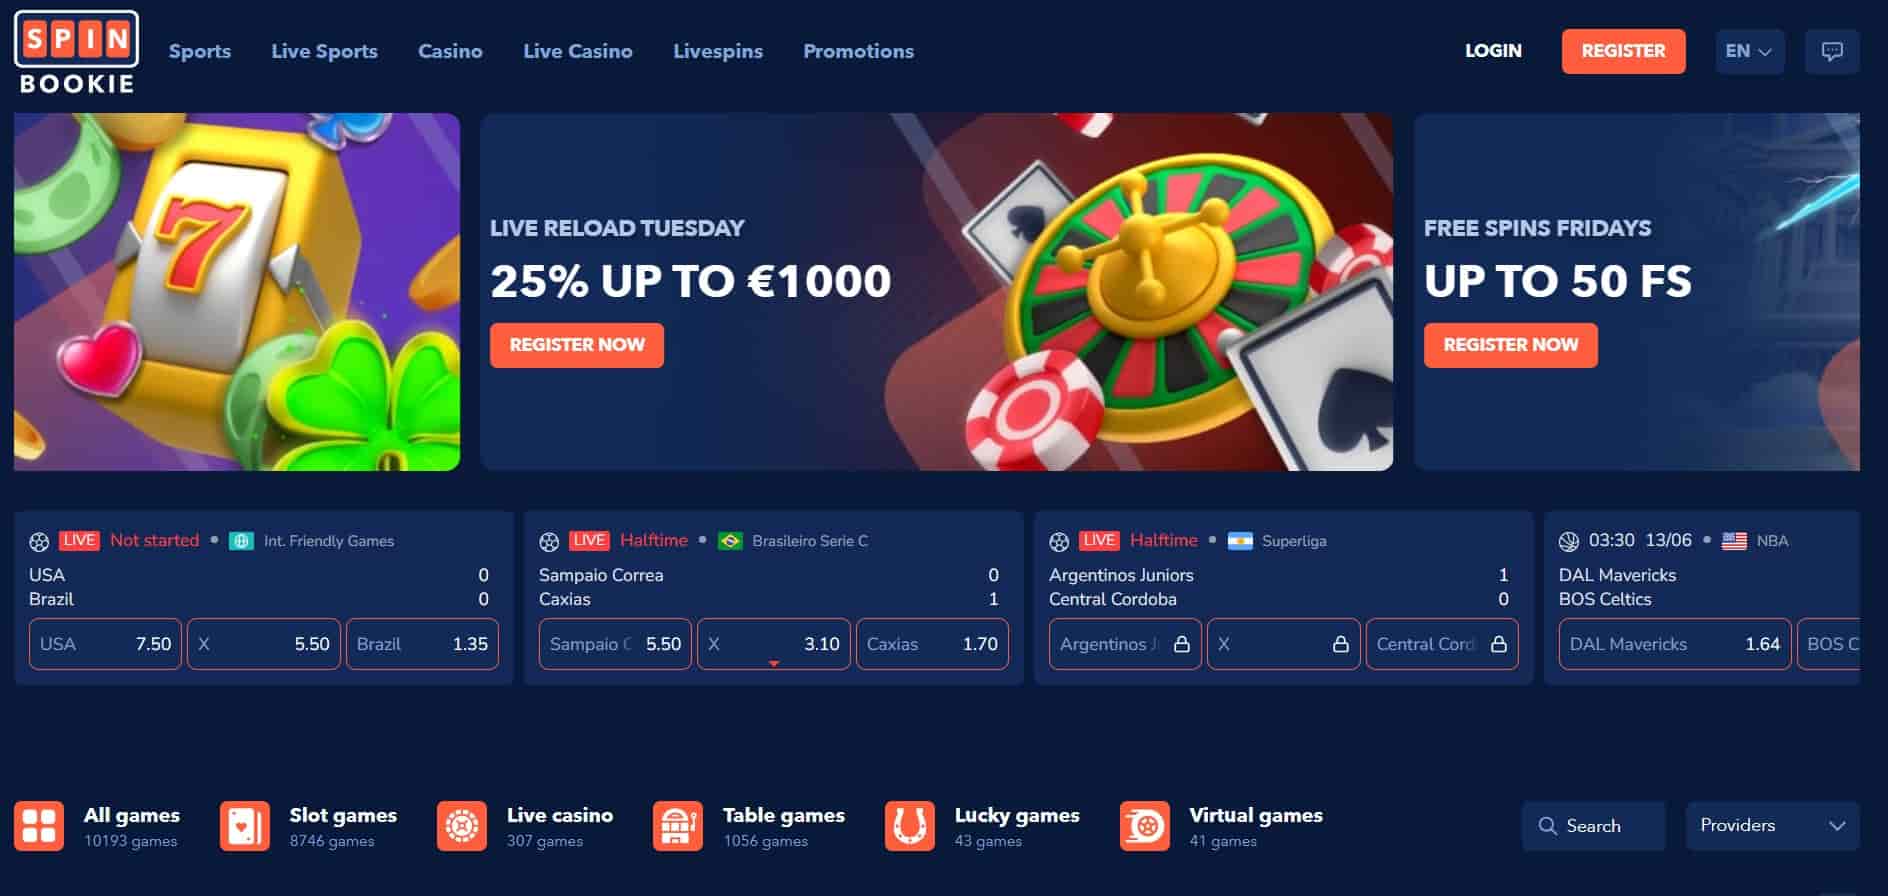 spin bookie casino main page